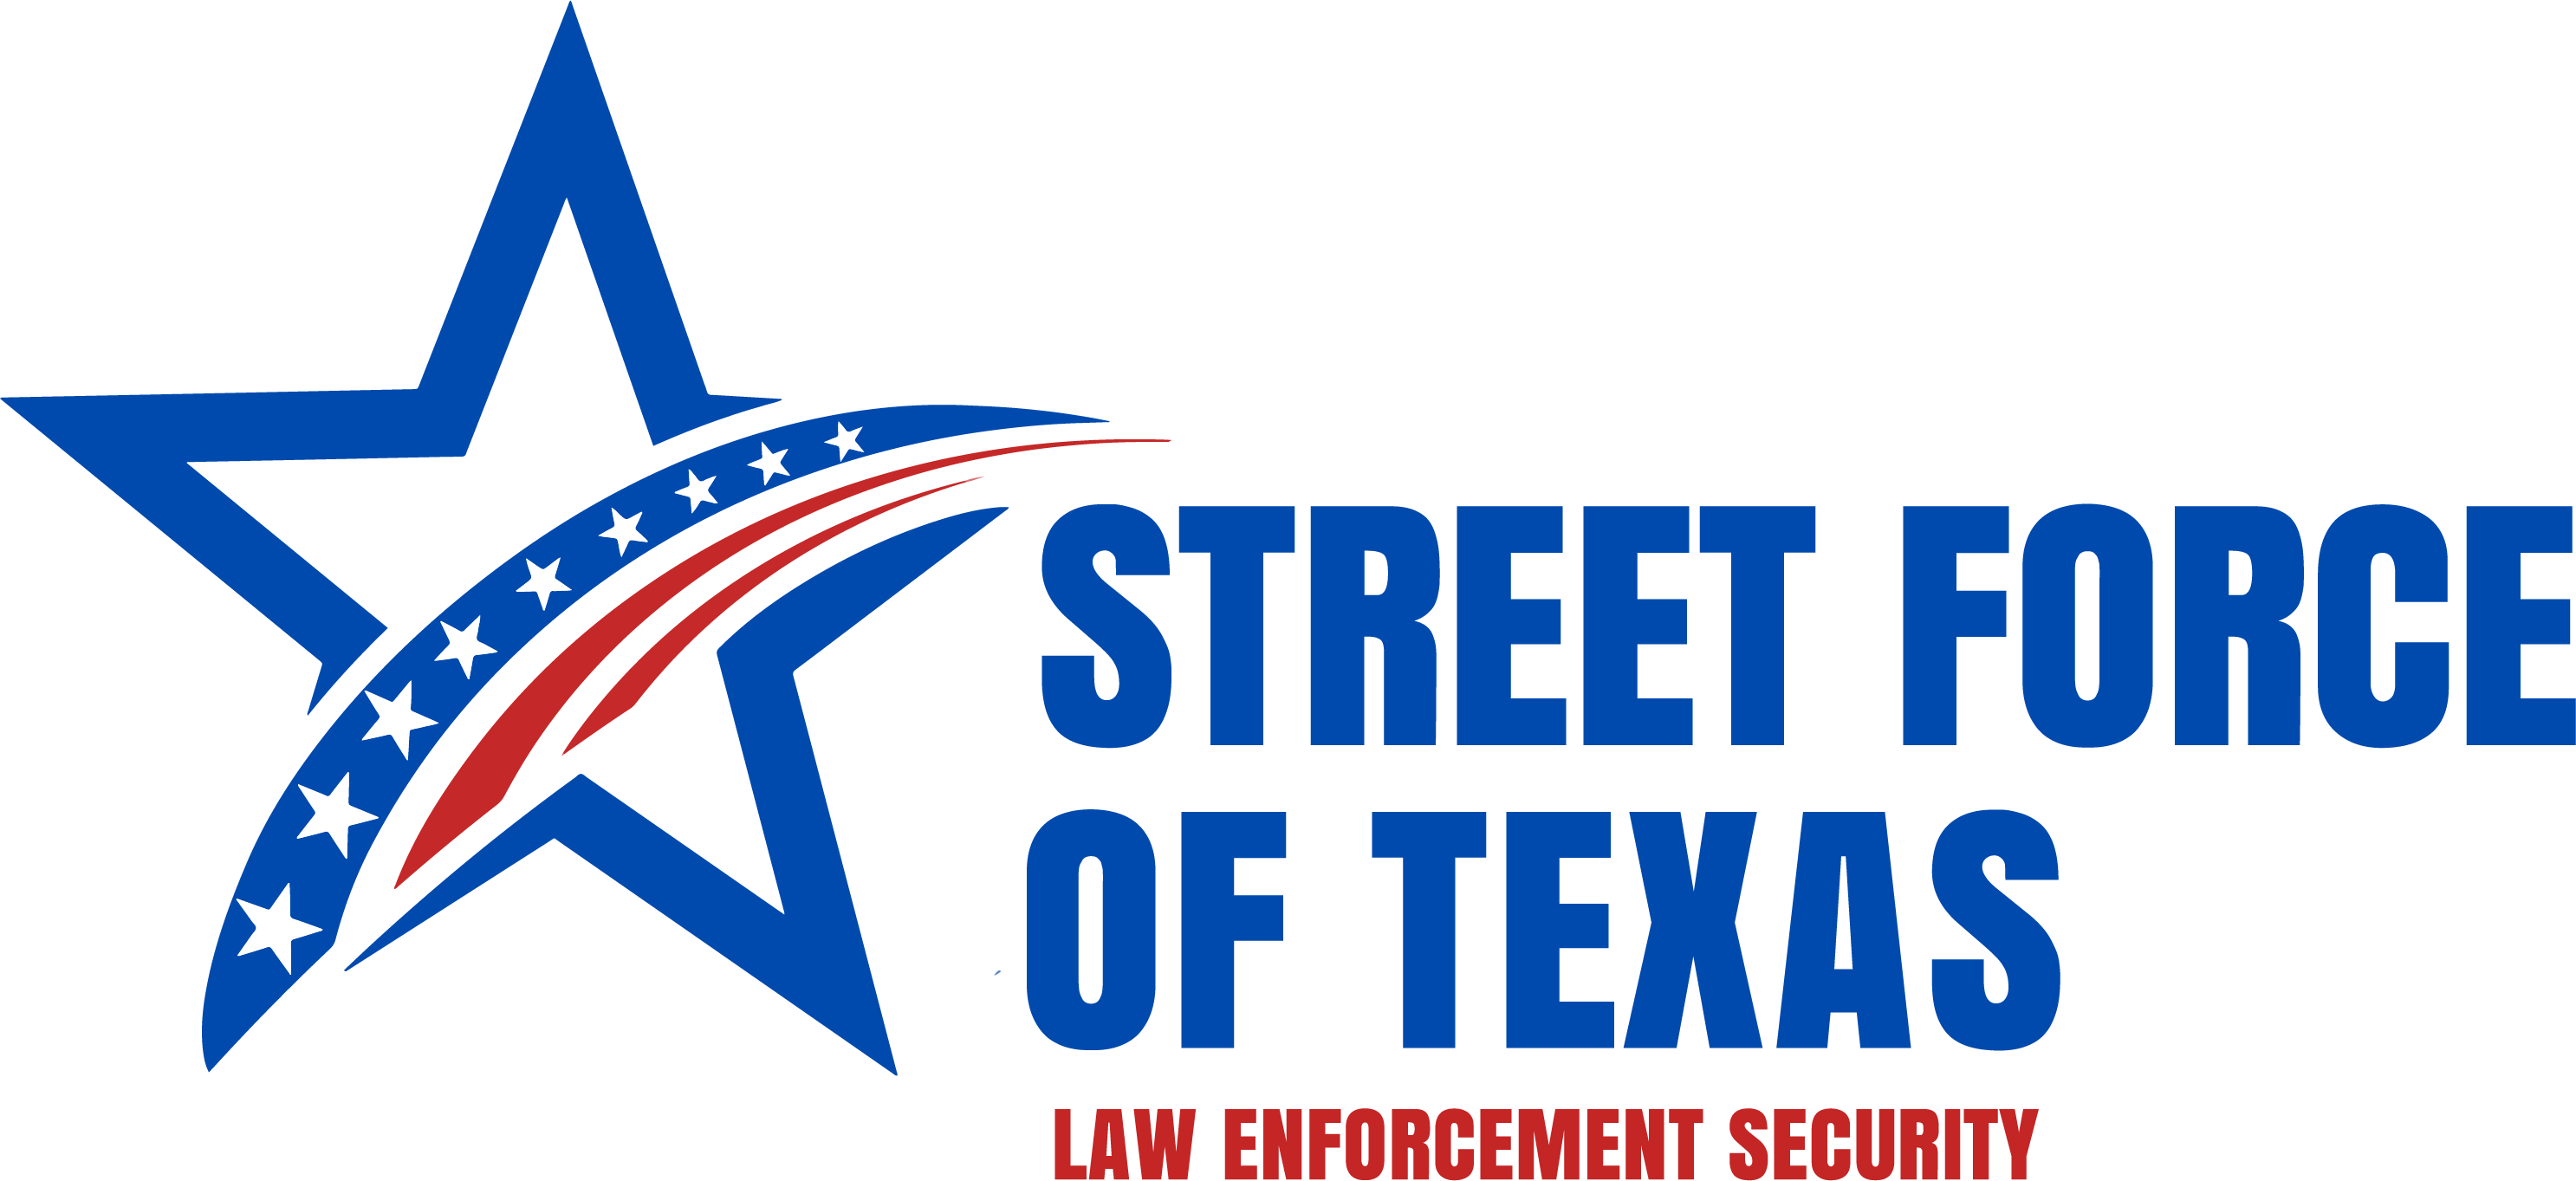 Street-Force-Logo-with-Flag-Horizontal.png